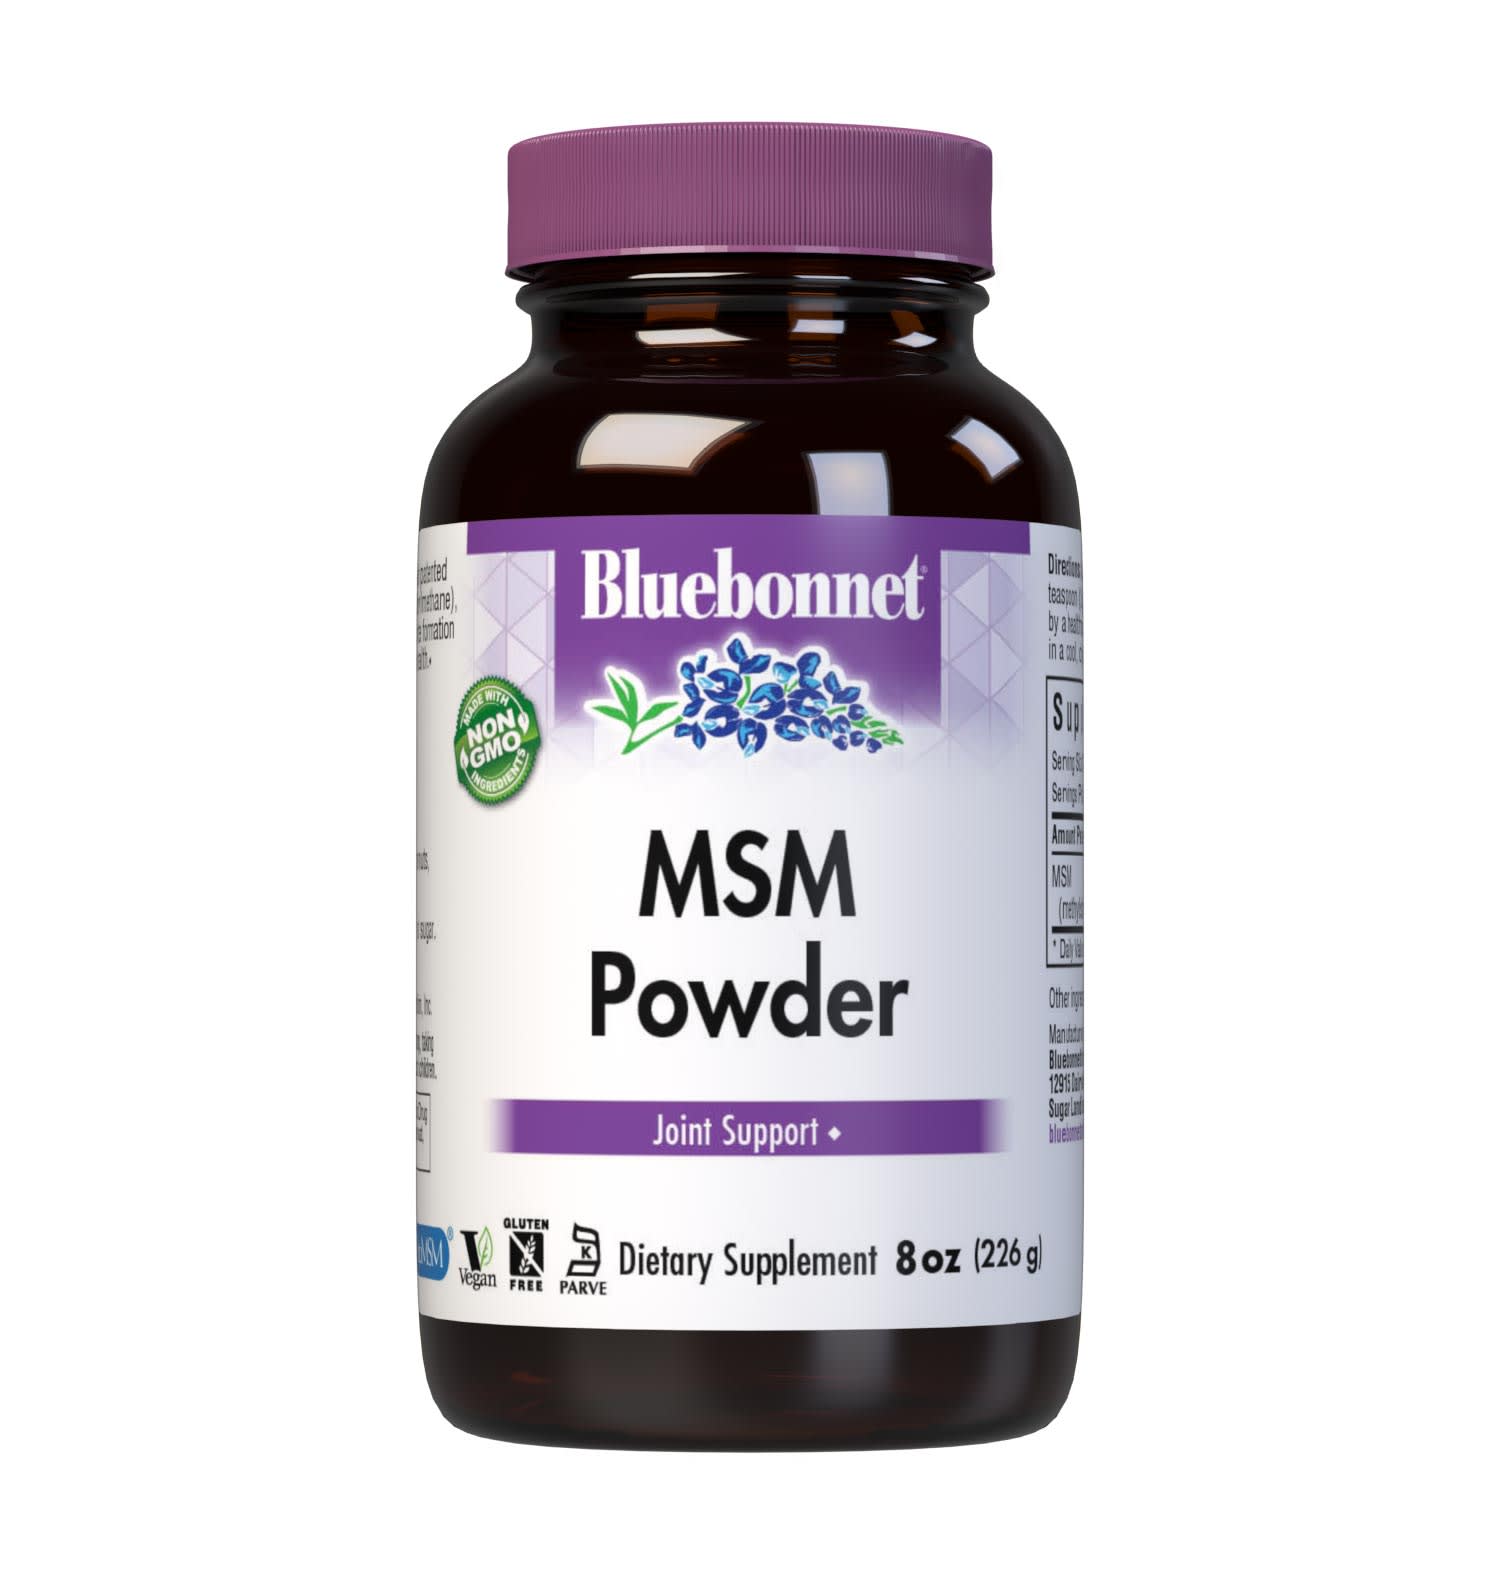 Bluebonnet’s MSM Powder is formulated with patented and clinically studied OptiMSM (methylsulfonylmethane), a non-toxic form of active sulfur that helps support the formation of healthy connective tissues for better joint health. #size_8 oz